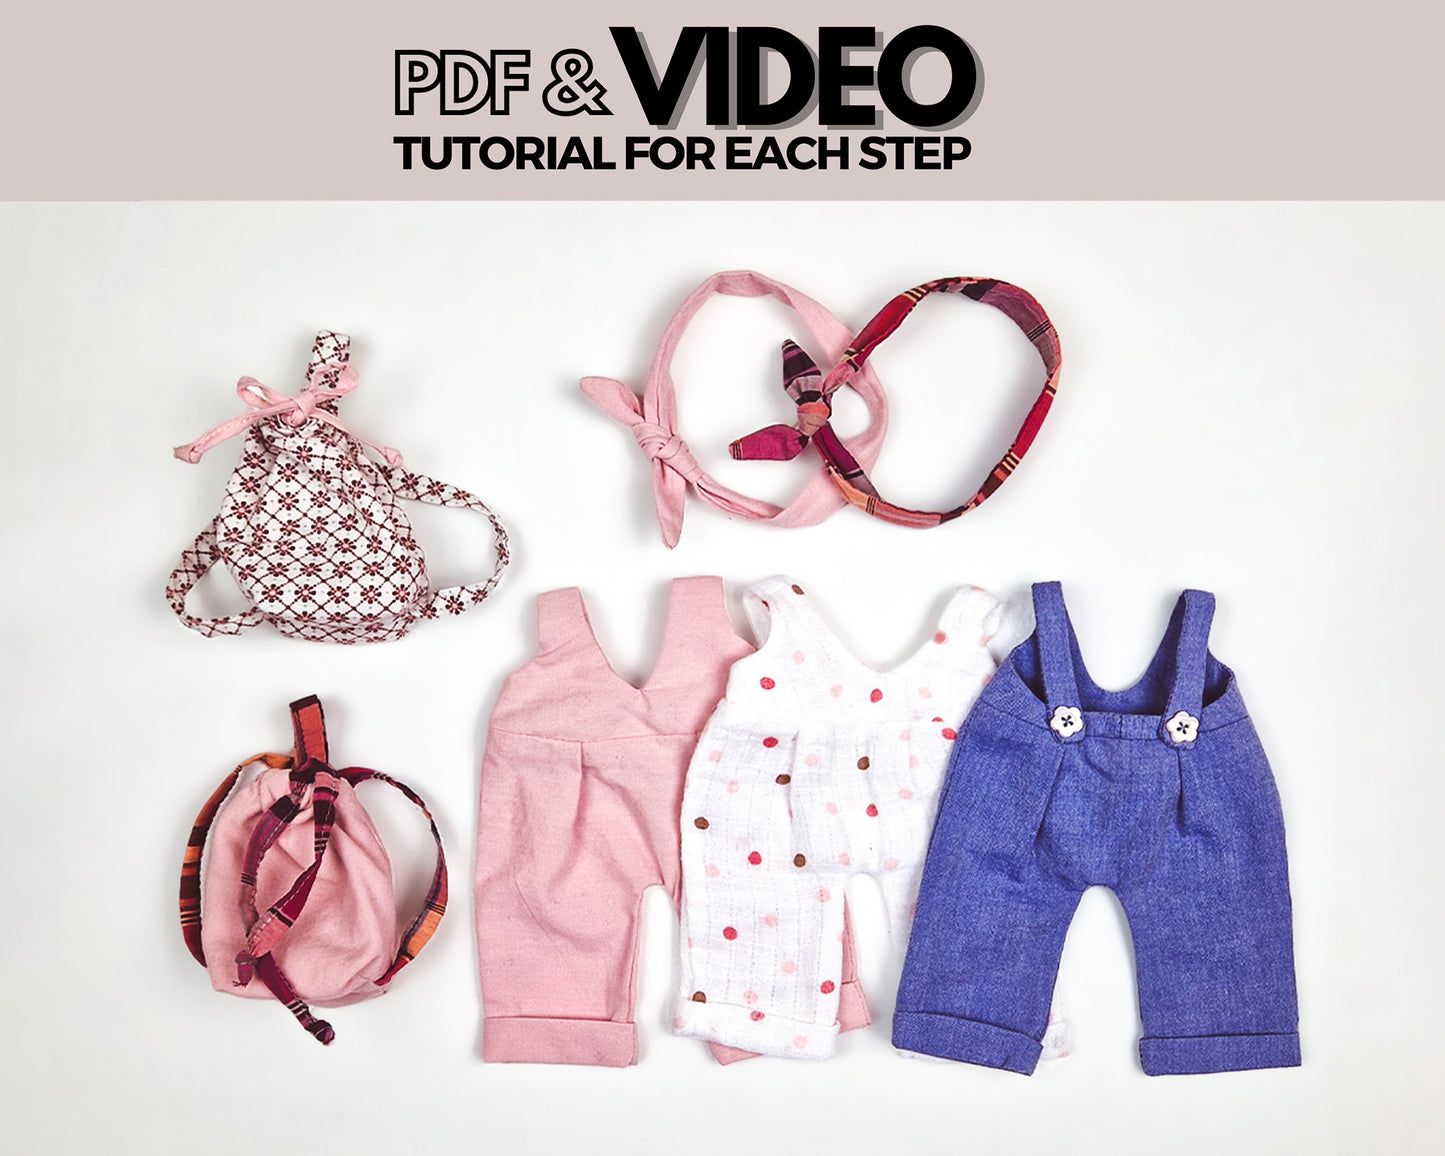 Clothes and accessories from Bear, Mom and Baby collections